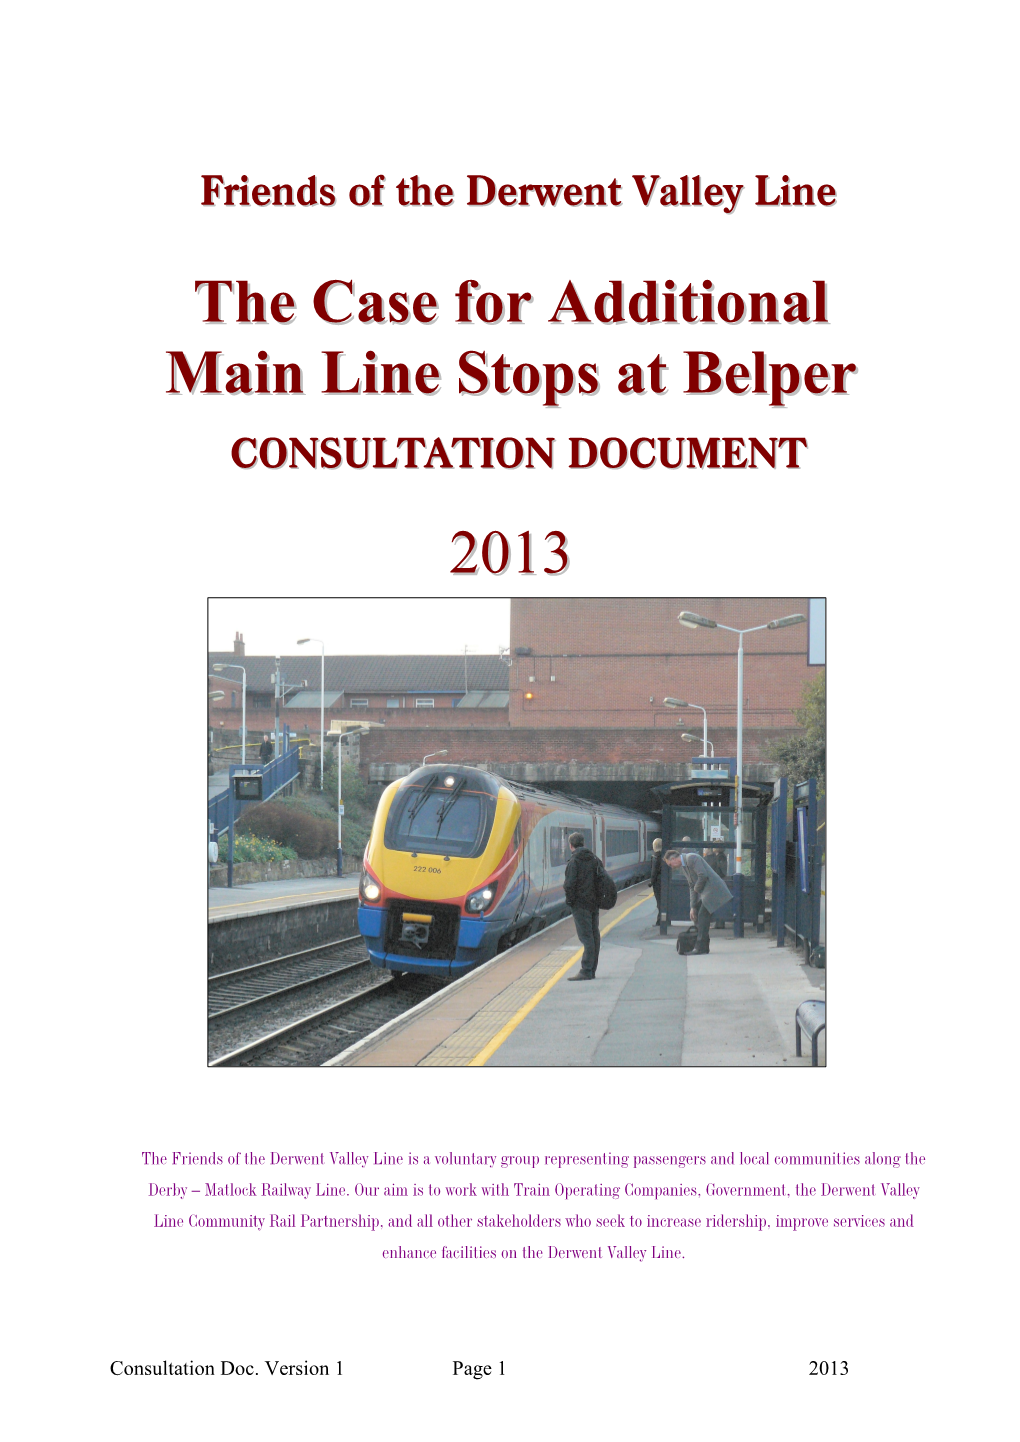 The Case for Additional Main Line Stops at Belper 2013